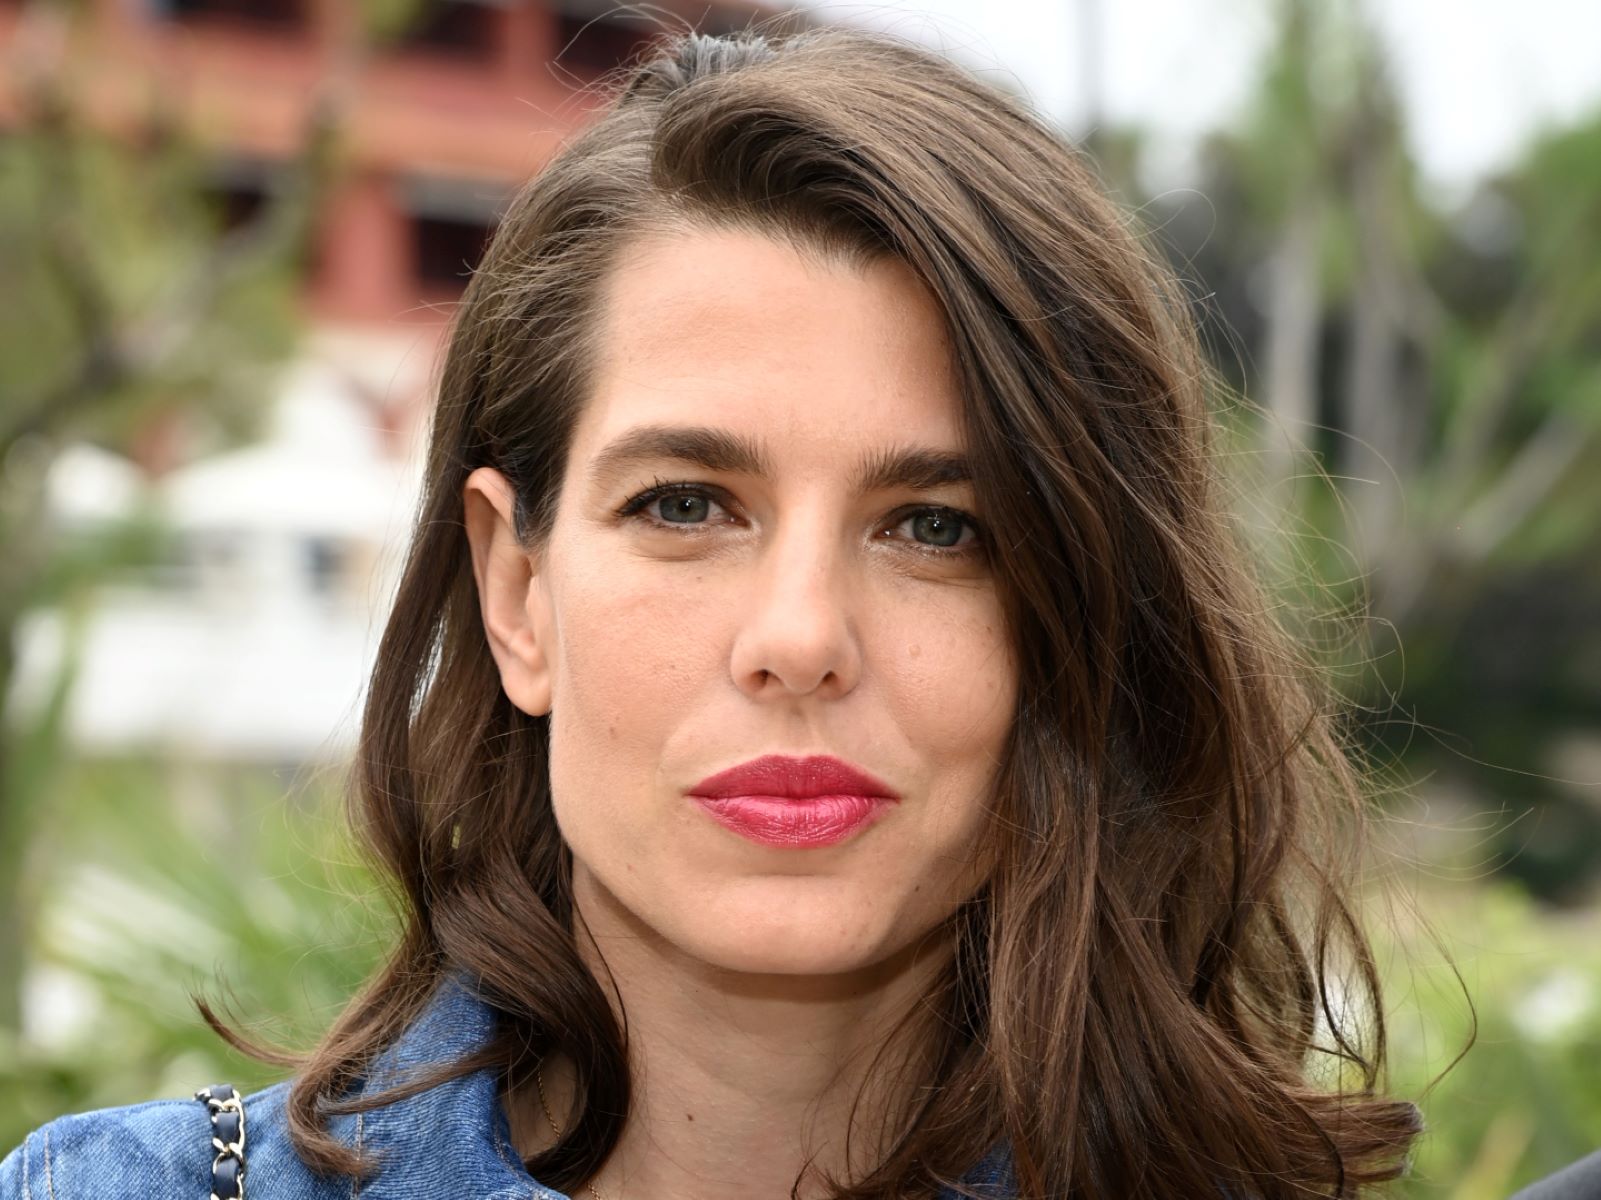 16 Astonishing Facts About Charlotte Casiraghi - Facts.net